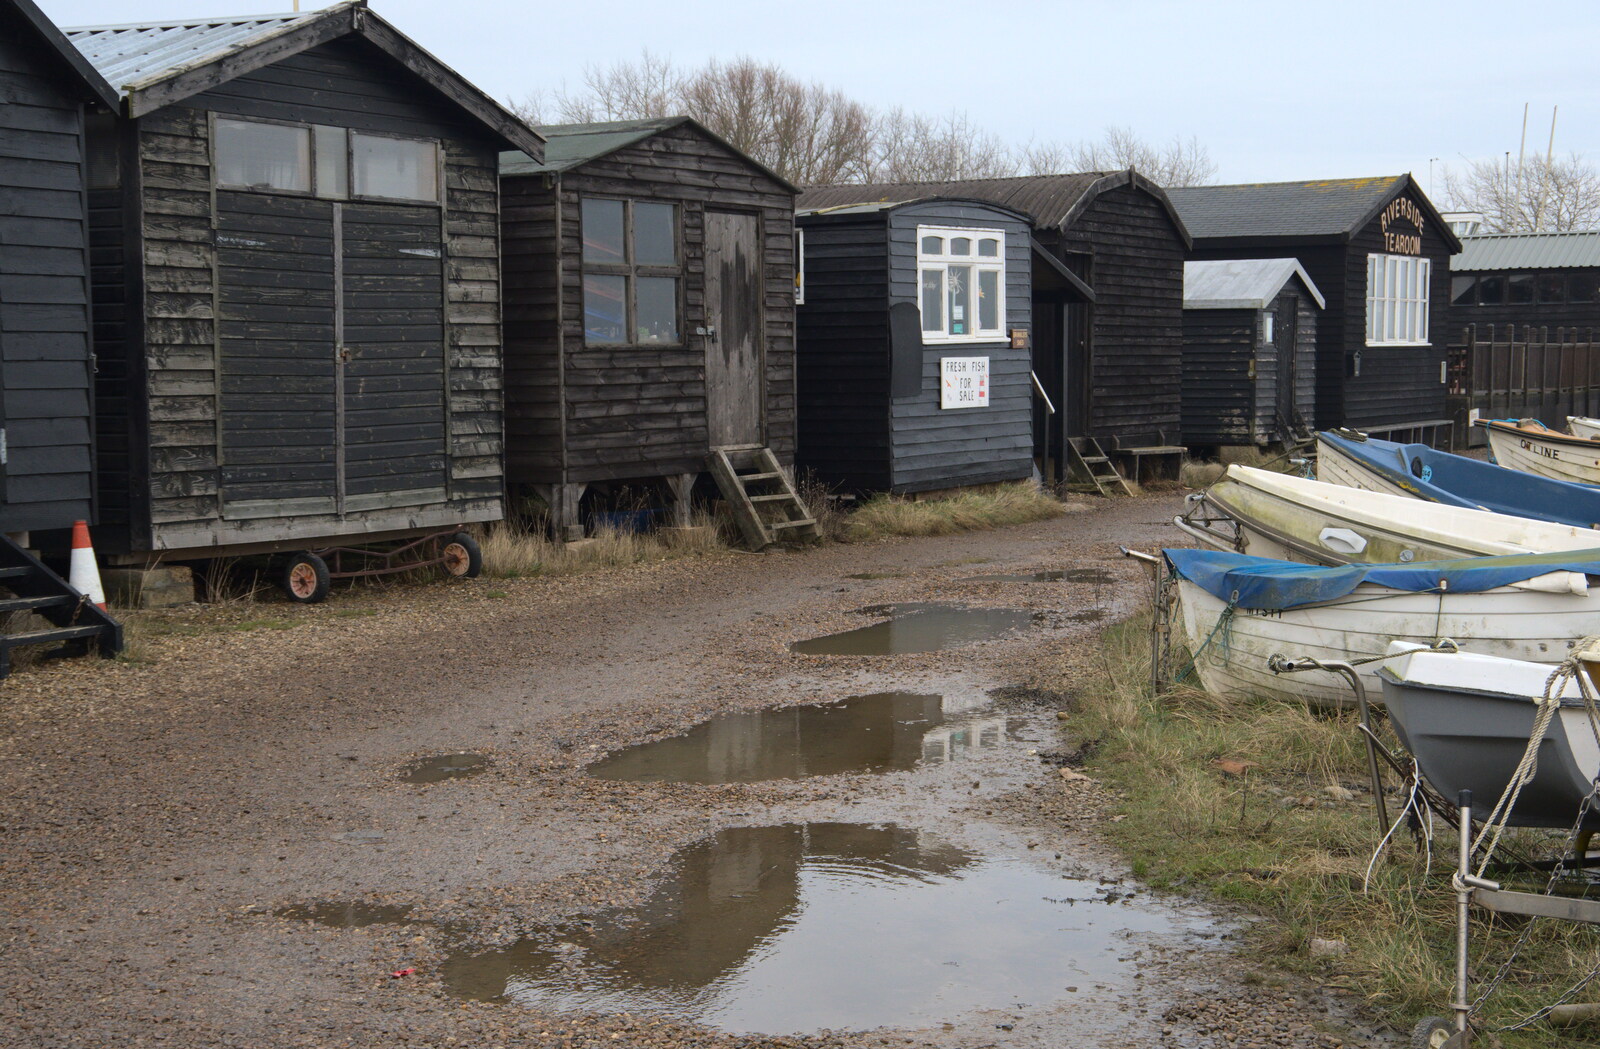 A Trip to Orford, Suffolk - 25th January 2020: Sheds on legs